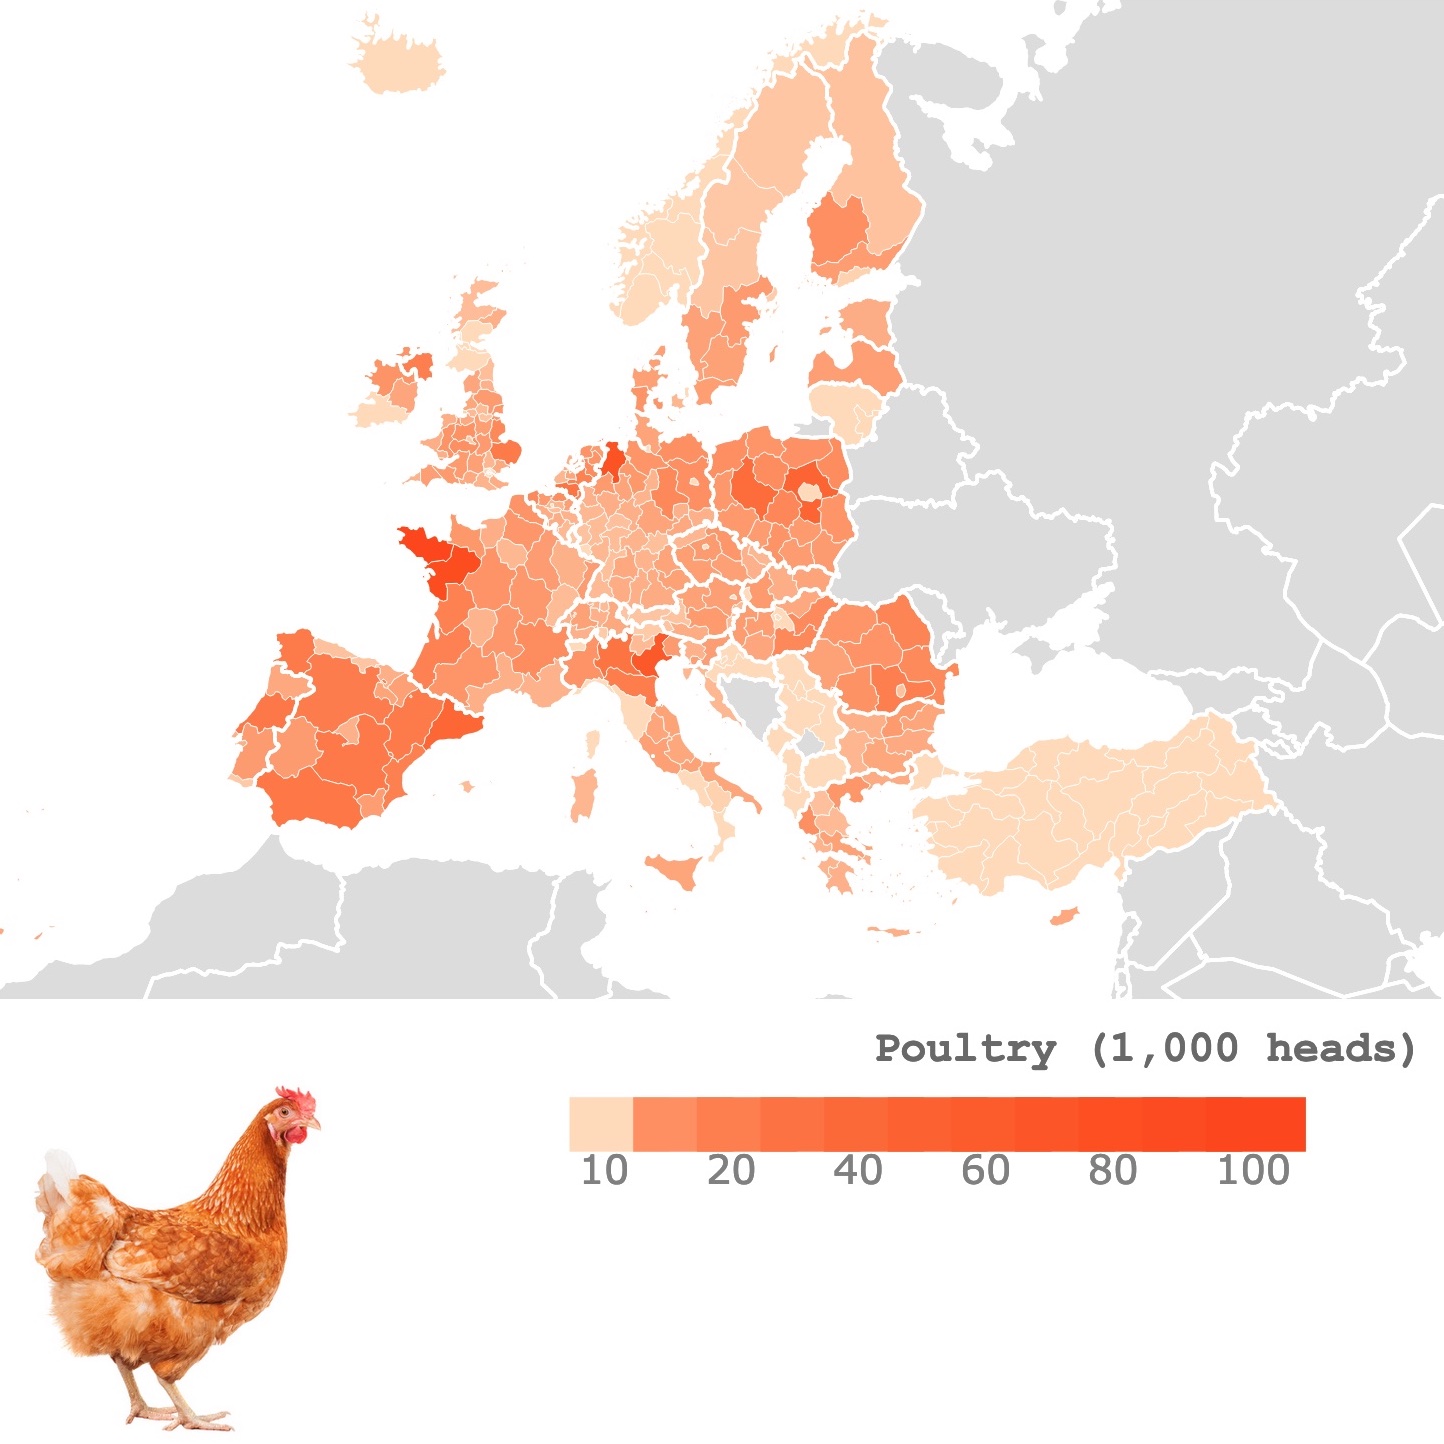 Map of Poultry Production in Europe